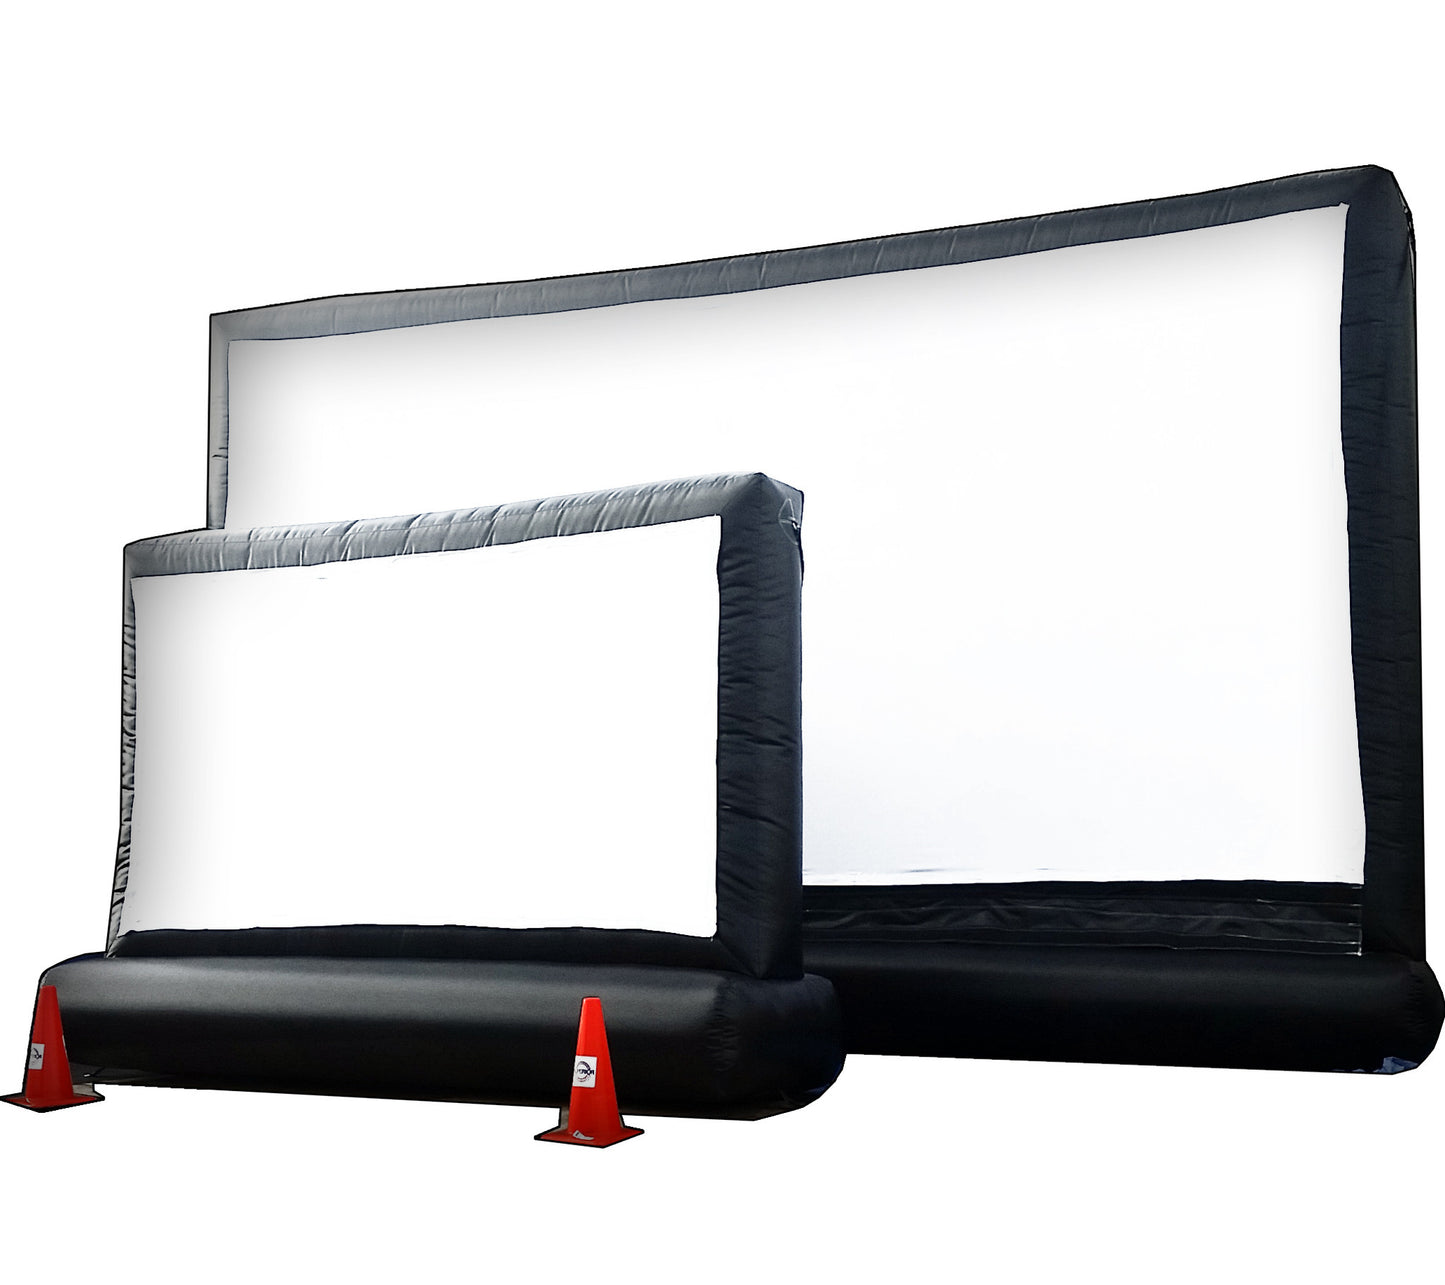 Used 2 INTIMATE INFLATABLE MOVIE SCREEN